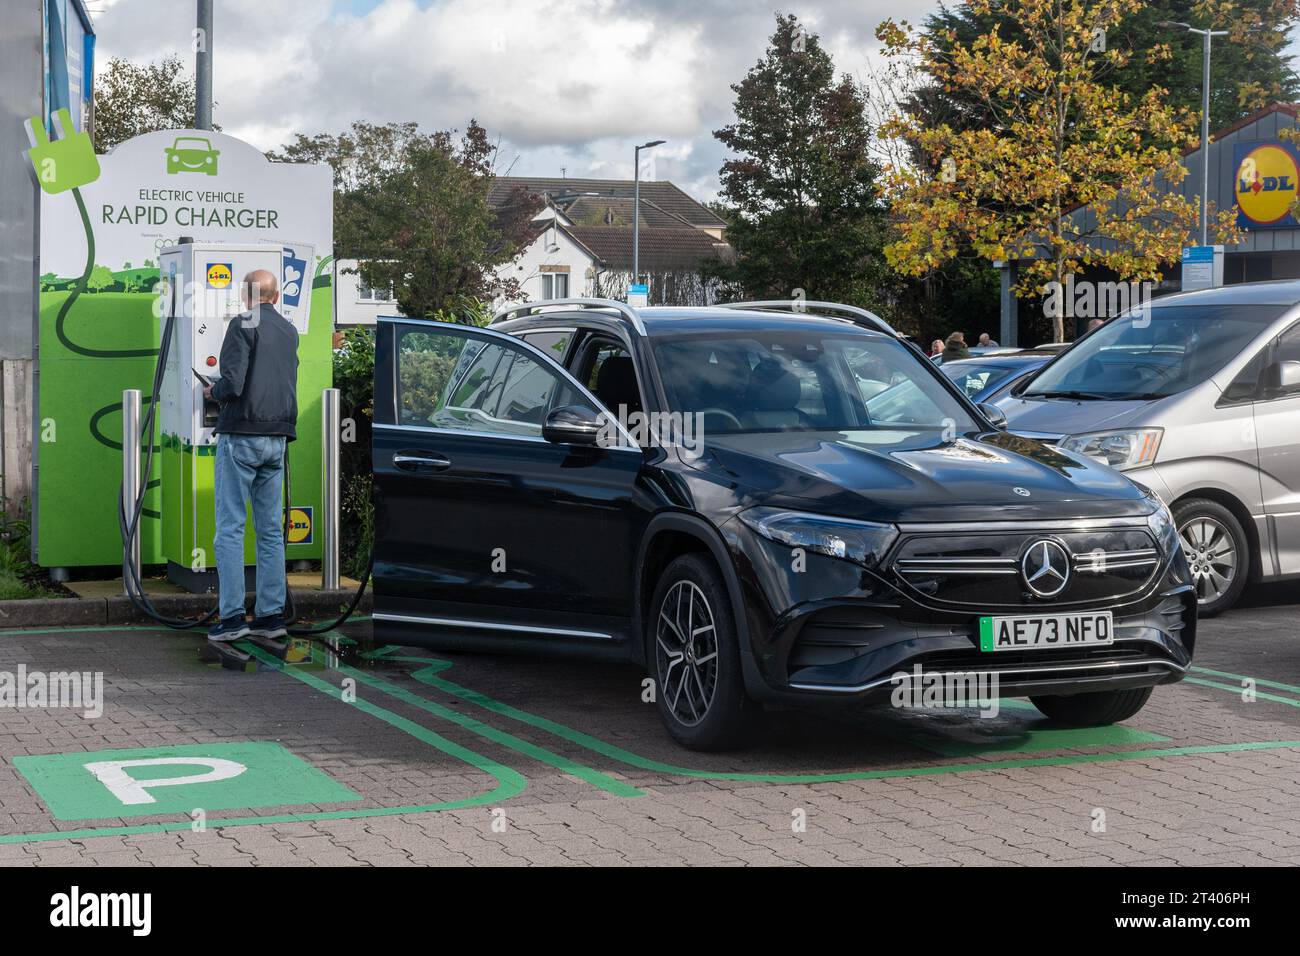 Man charging his car battery at an electric vehicle rapid charger in a Lidl supermarket car park, England, UK Stock Photo